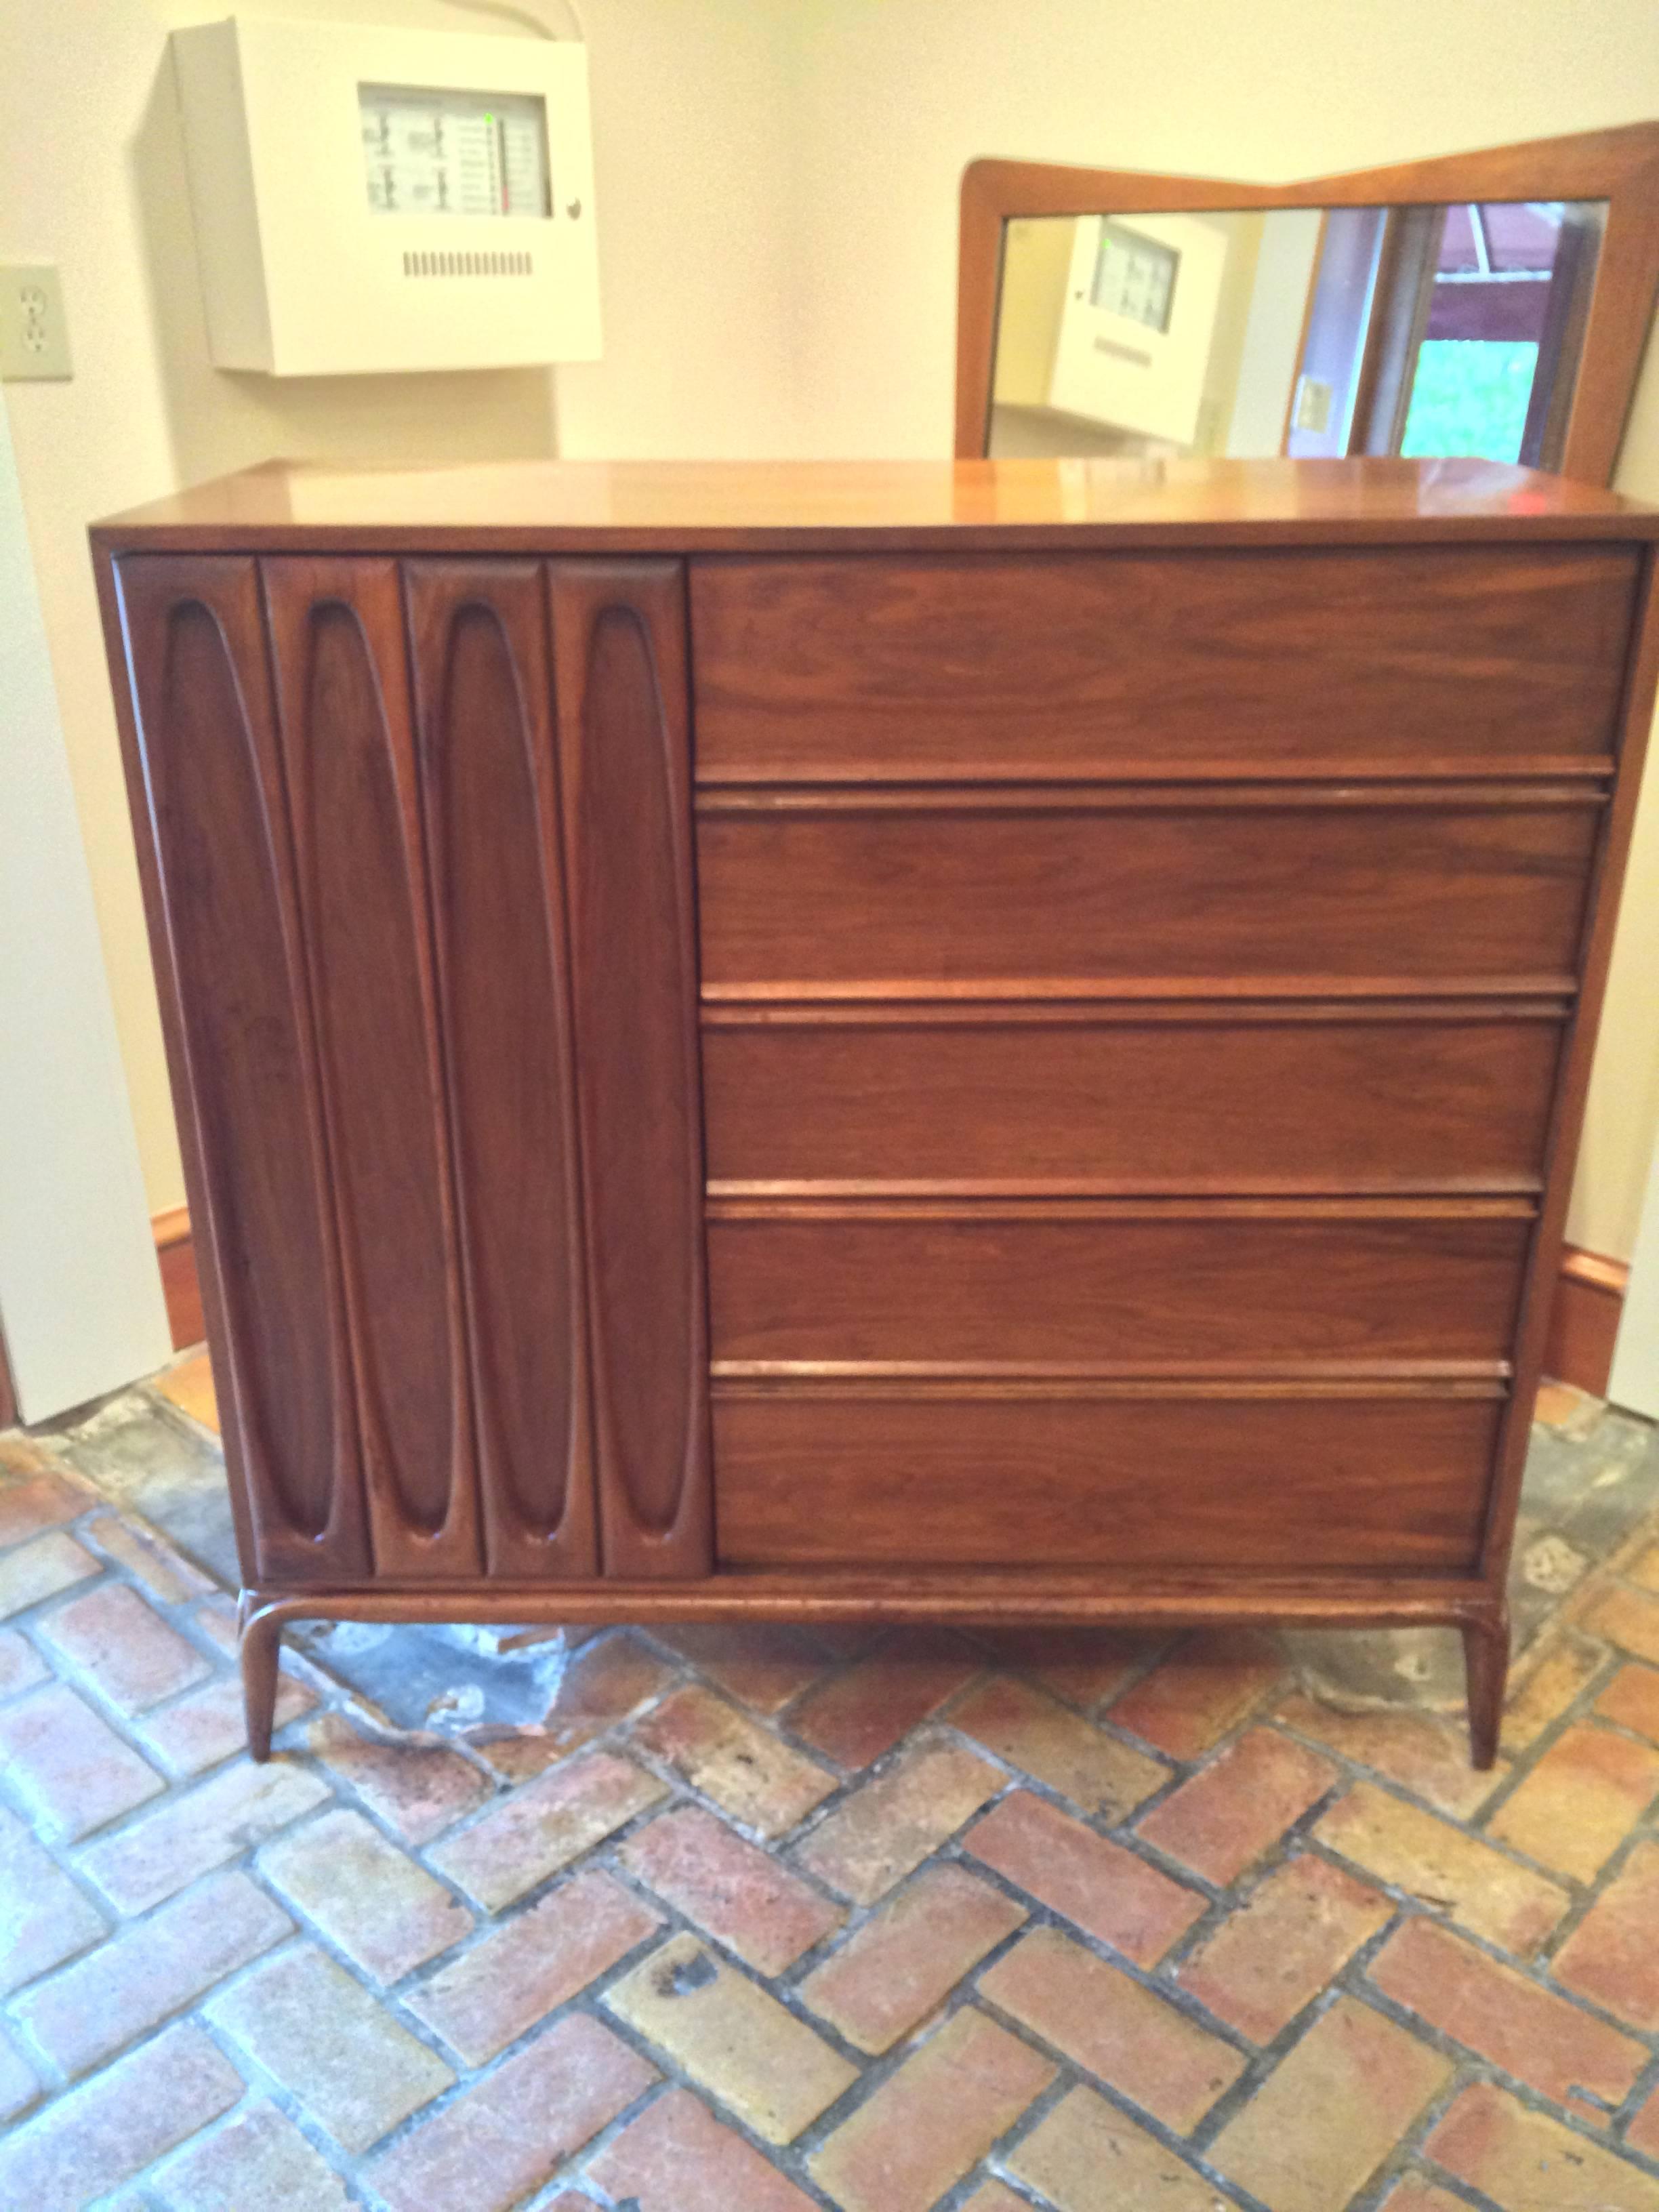 Sculptural Mid-Century Modern highboy dresser.Fabulous storage piece. This  walnut beauty has 5 deep drawers and a sculptural door on the left that opens to 5 smaller pull out drawers. Matching nightstands and credenza available as well. Matching